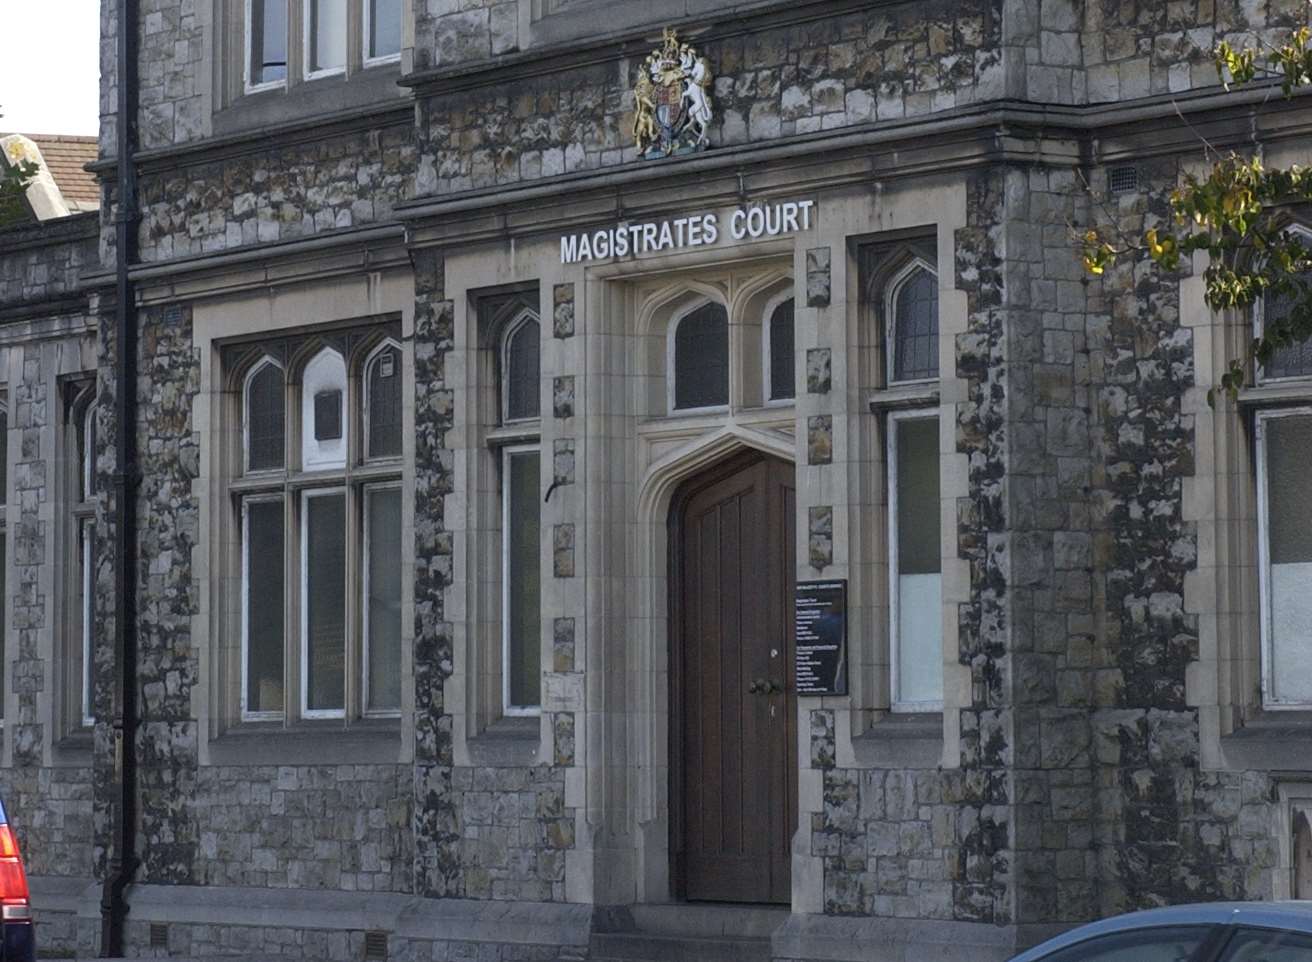 The pair appeared at Maidstone Magistrates' Court